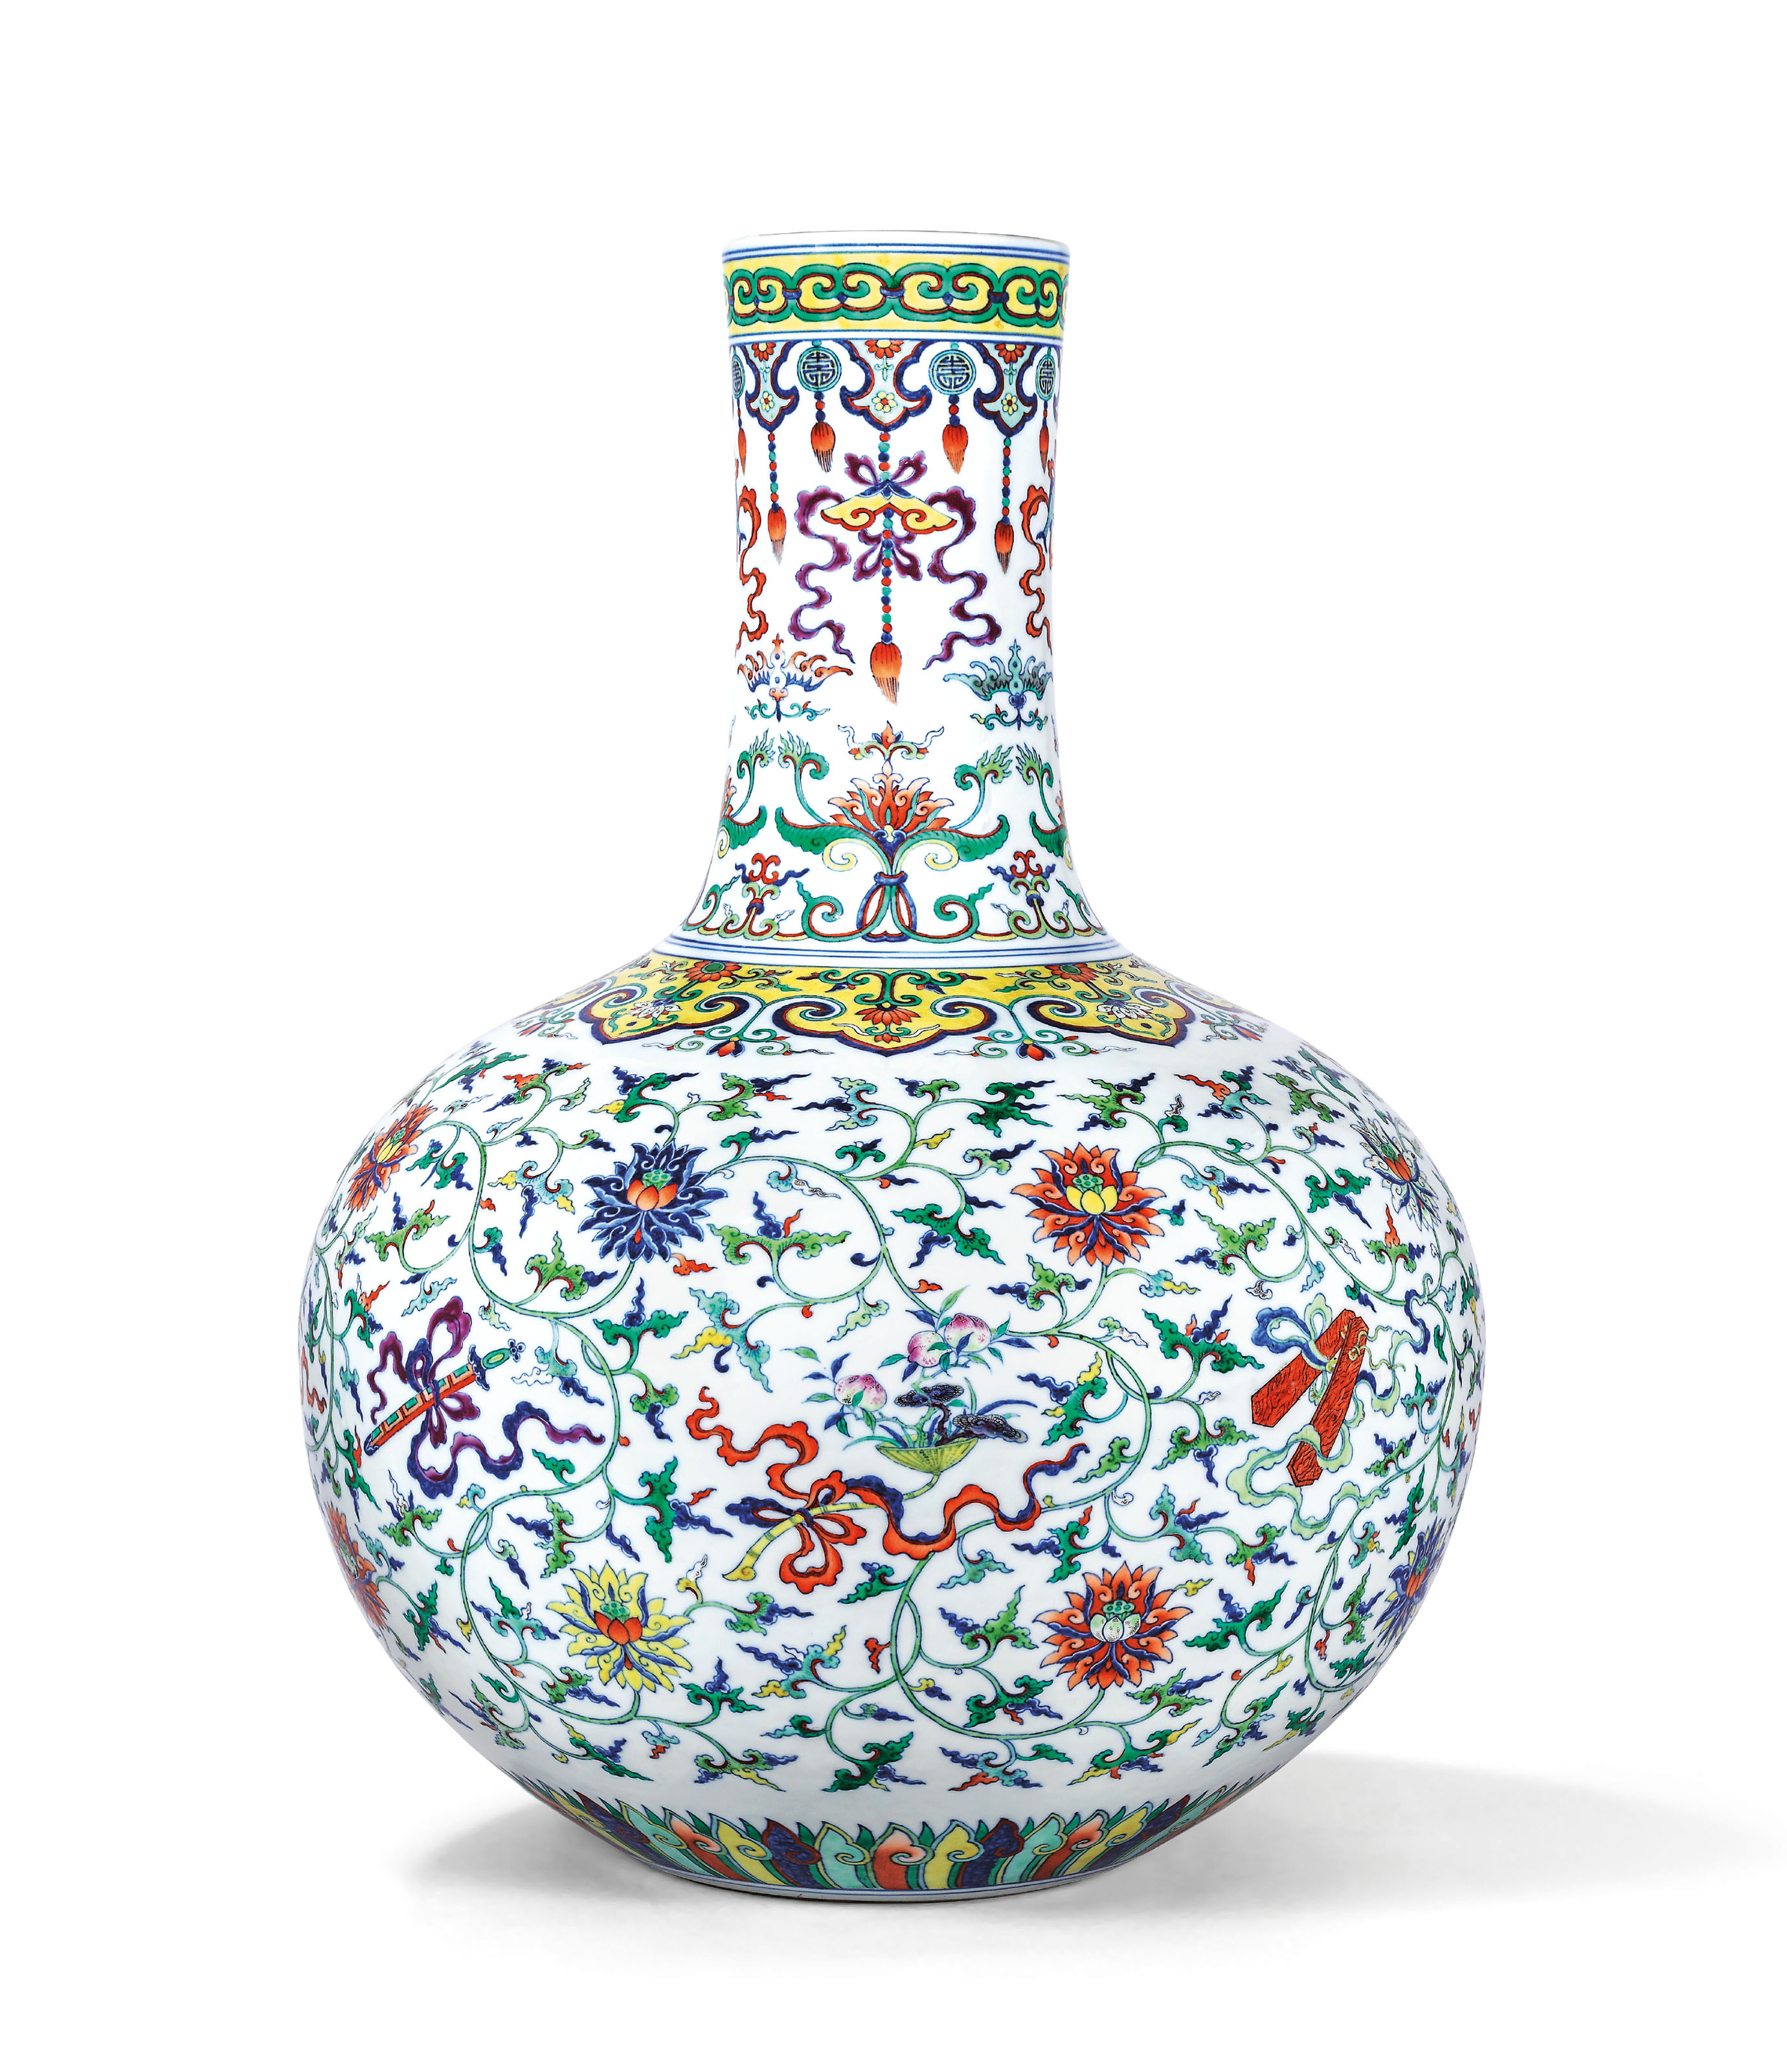 18 Stylish Jeff Koons Puppy Vase Price 2024 free download jeff koons puppy vase price of chinese art throughout this rare chinese vase languished in storage at an oklahoma museum for over a decade then it sold for 14 5 million